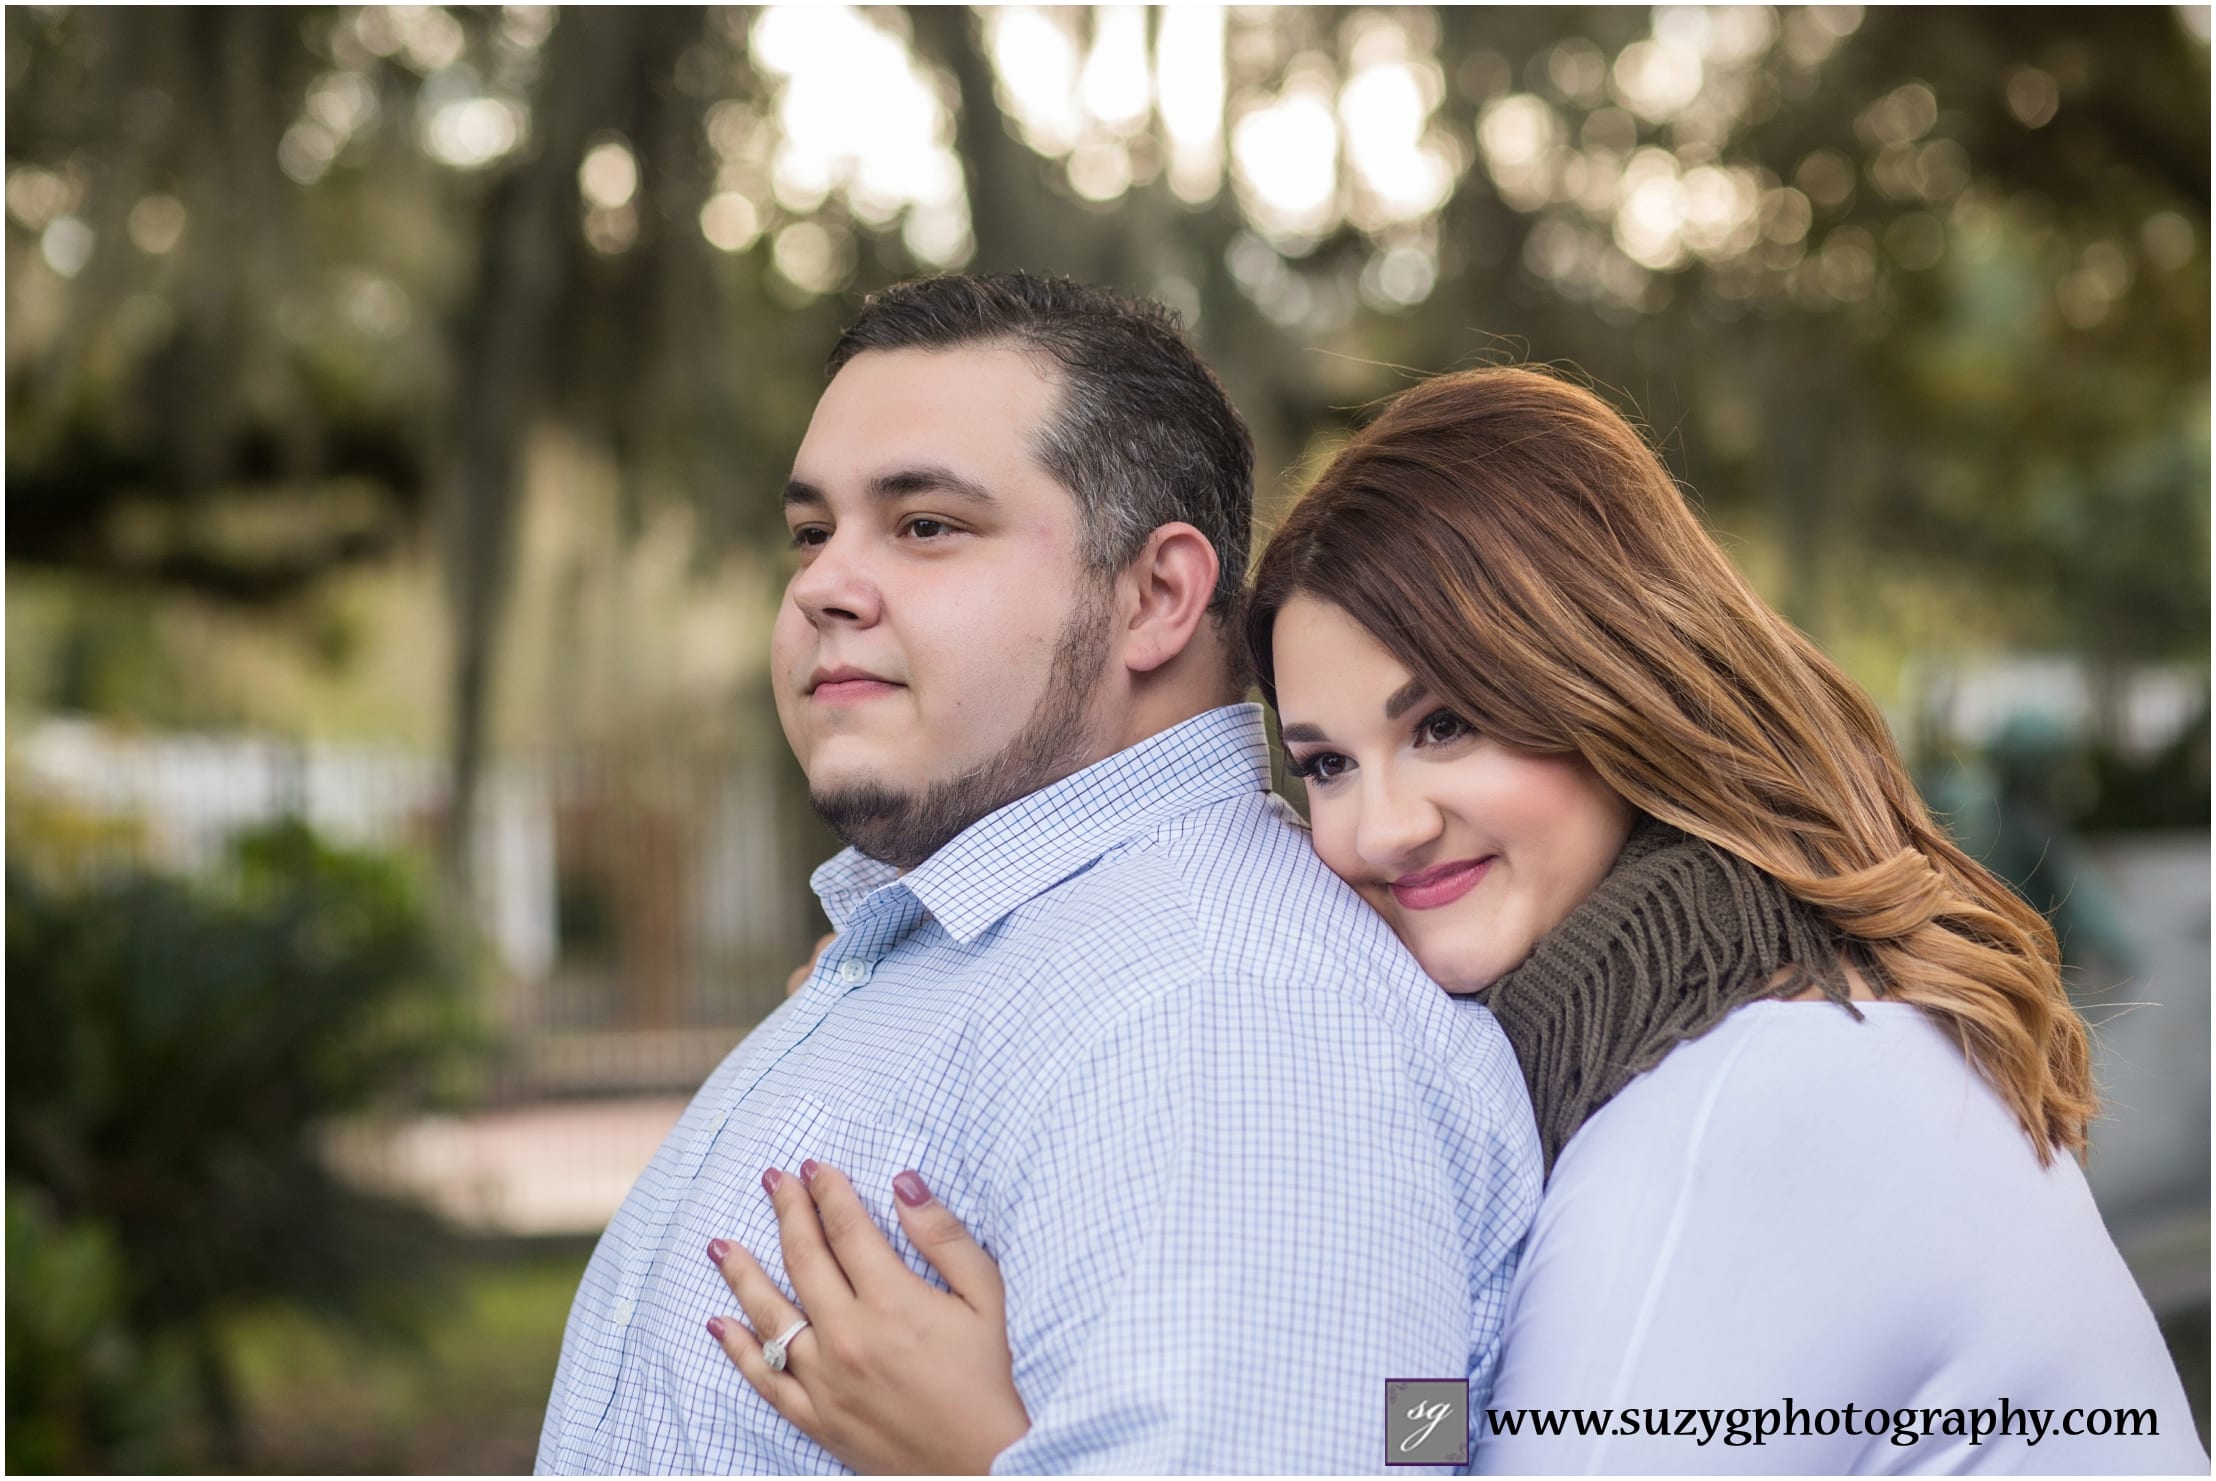 Engagement Session- New Orleans-louisiana wedding photographer-wedding photography-suzy-g-photography-weddings_0019